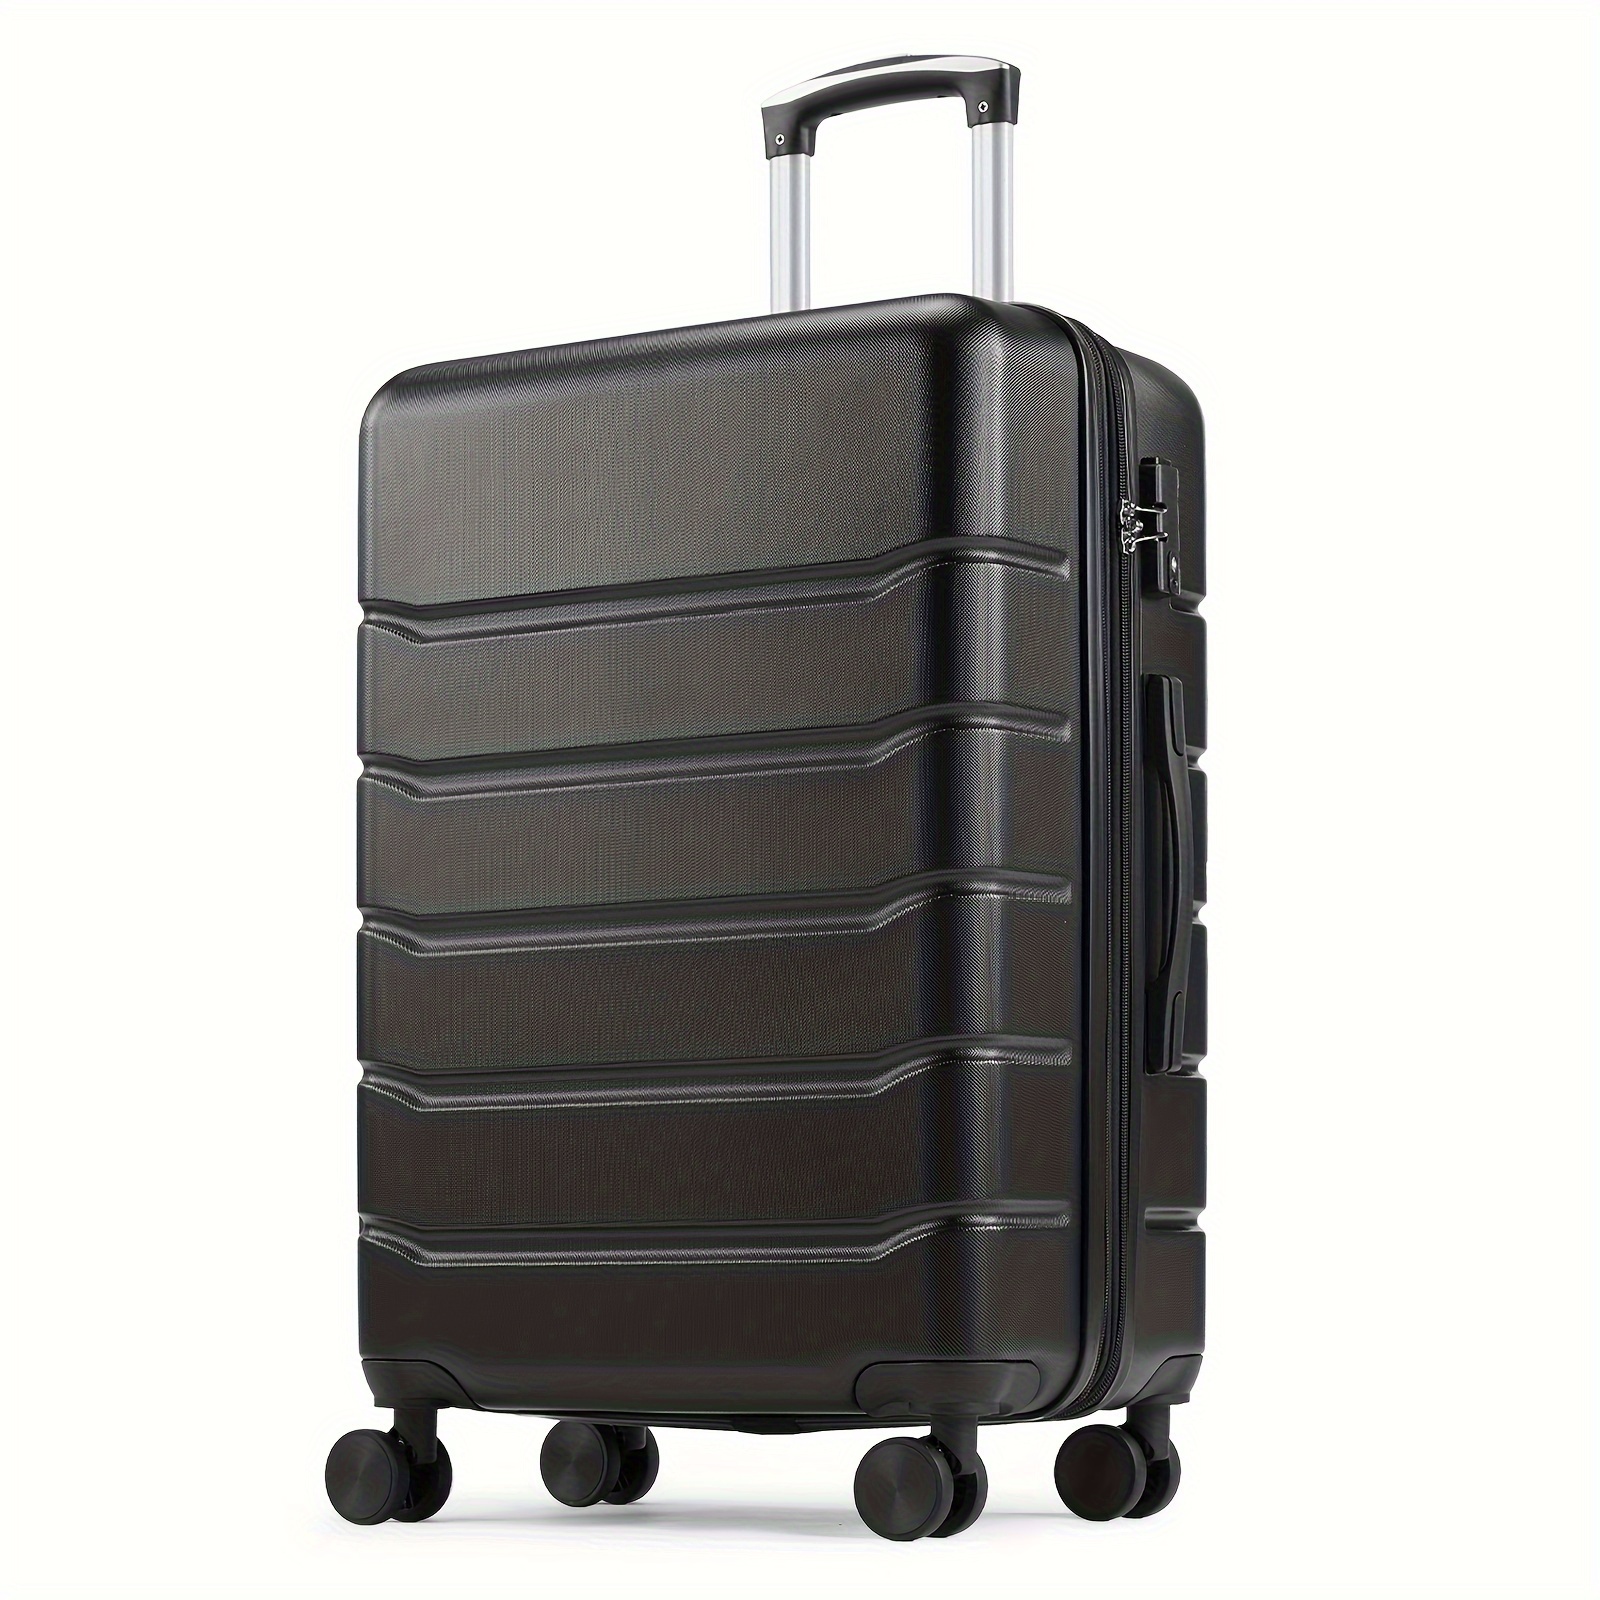 

20 Inch Travel In Style And Security With Our Hard Shell Abs Suitcase Equipped With Double Spinner Wheels. This Lightweight, Expandable Rolling Luggage Features A Tsa Lock For Adde